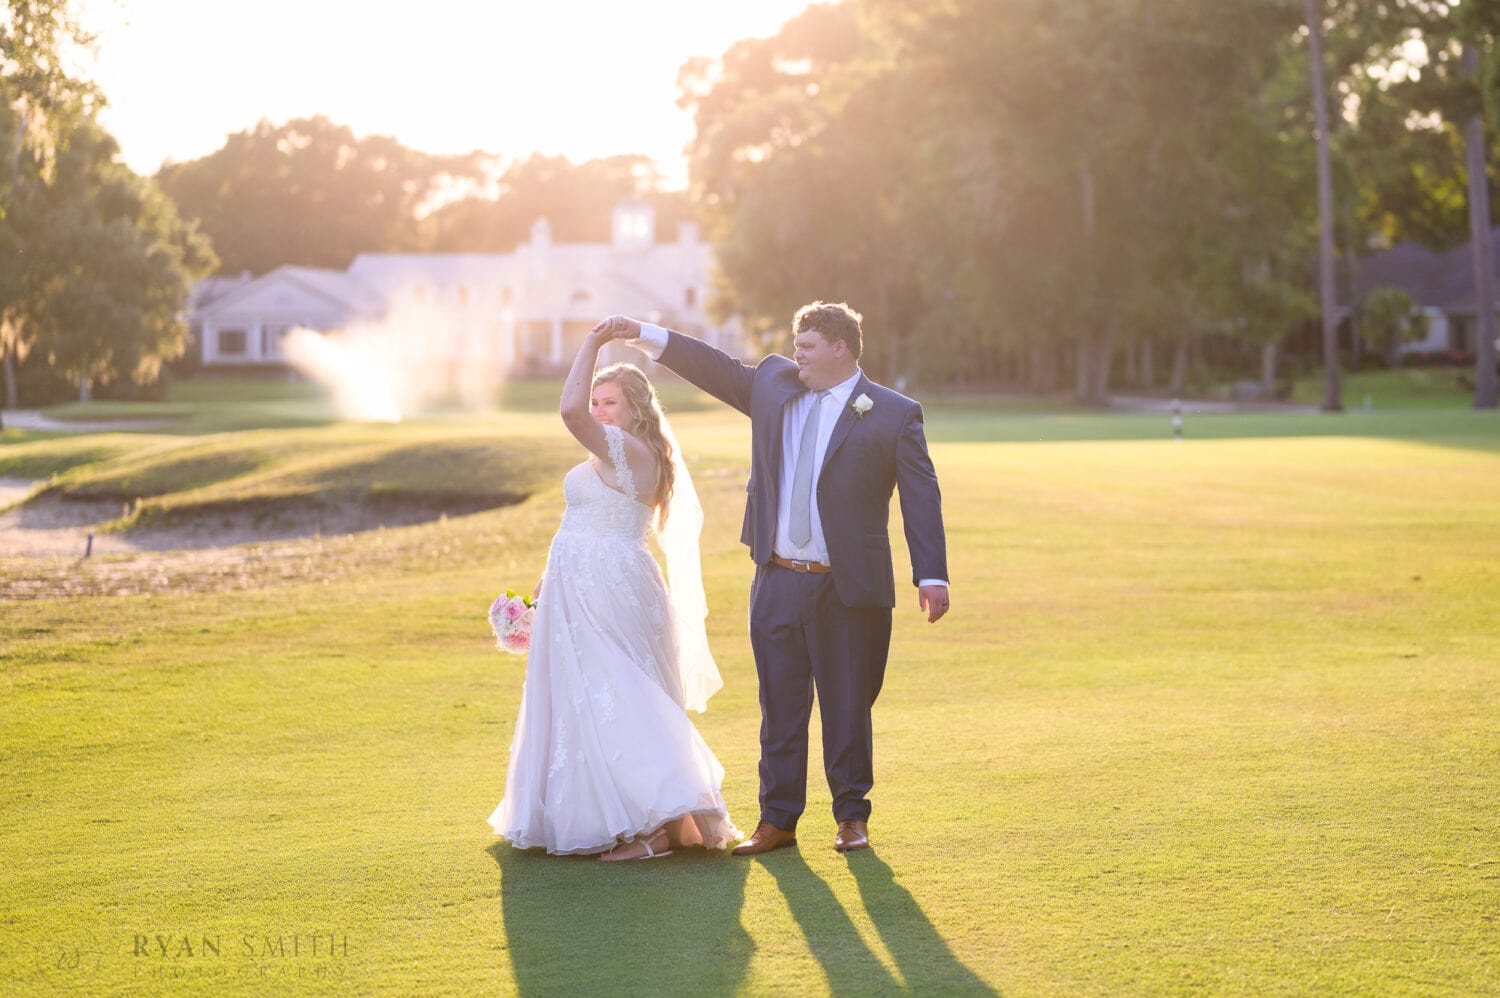 Holding hands walking down the golf course - Pawleys Plantation